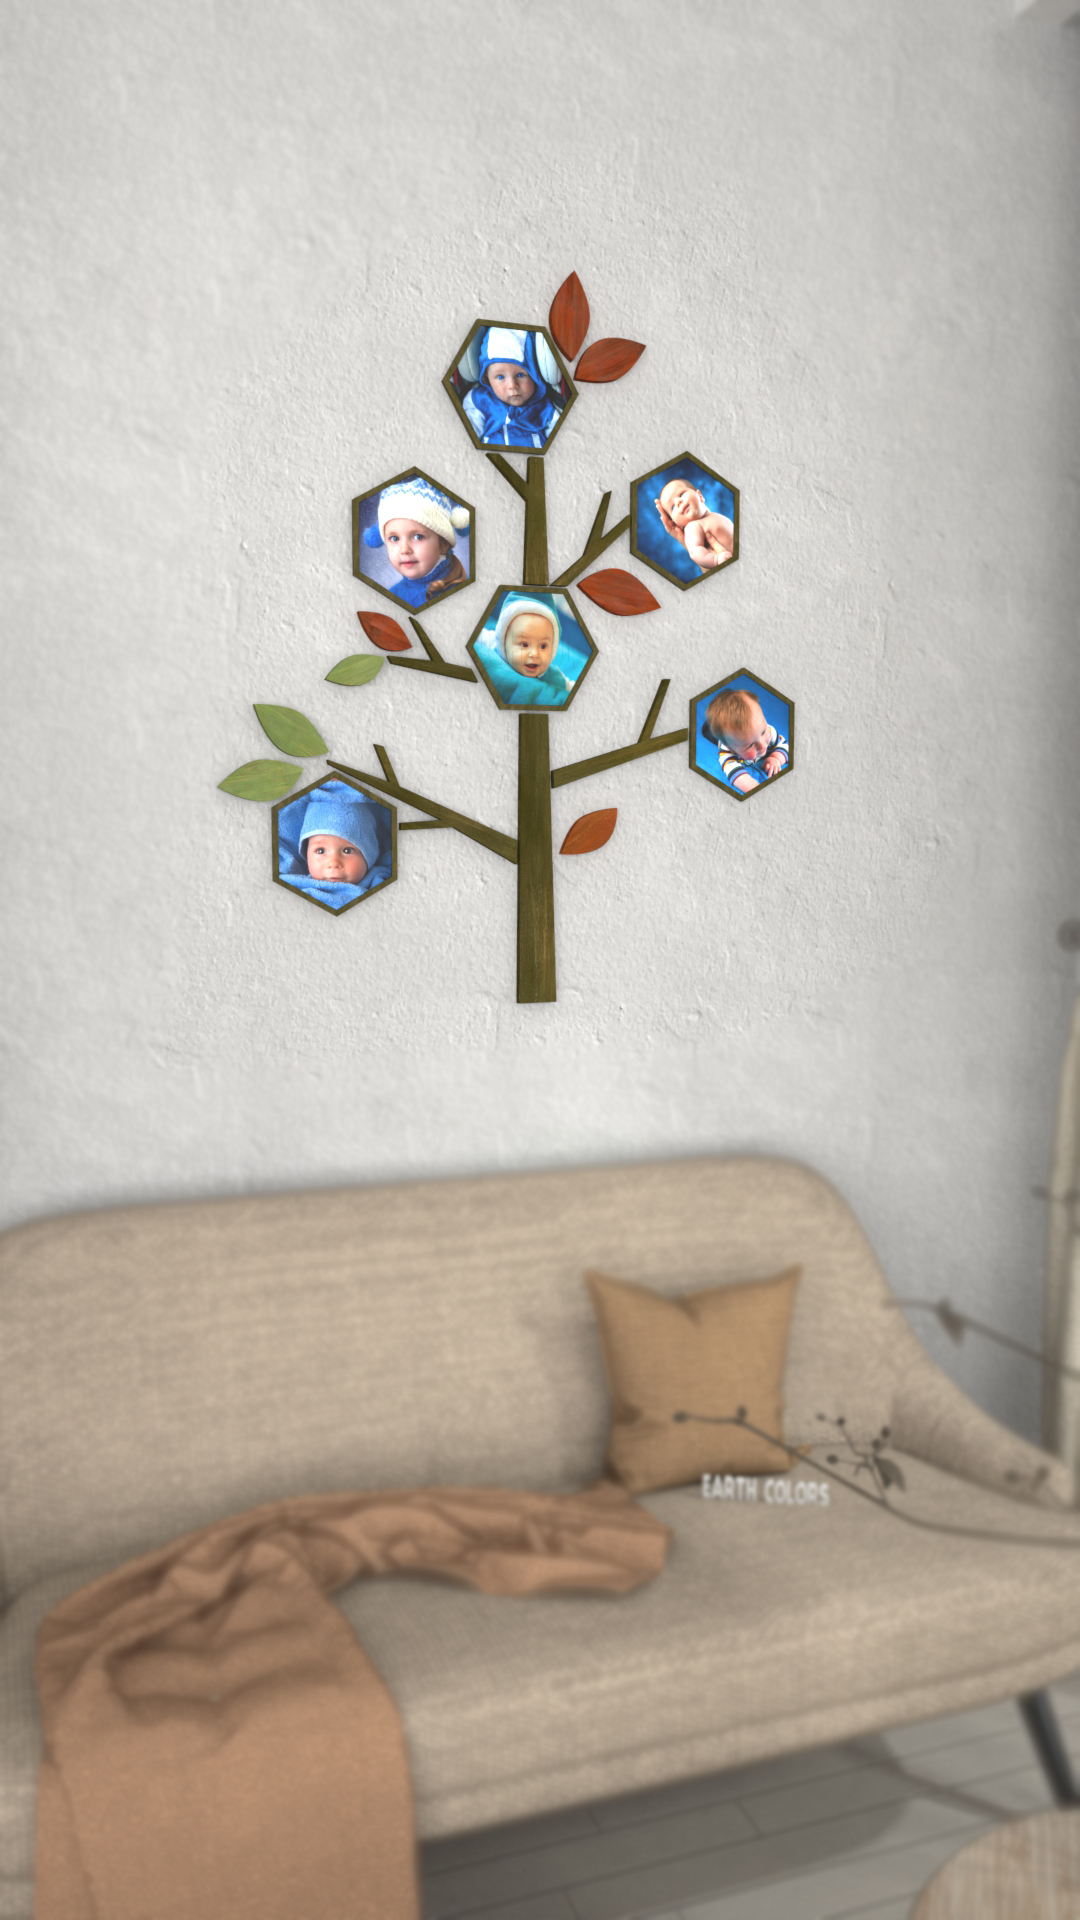 Get in family to wood facts on Wall art tree of life